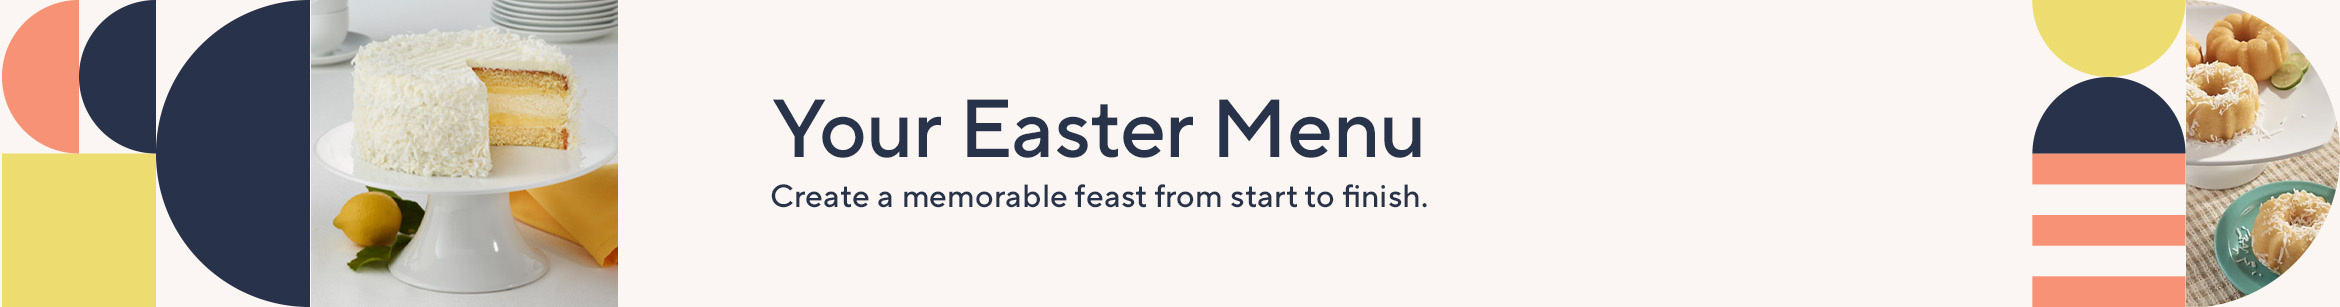 Your Easter Menu. Create a memorable feast from start to finish. 